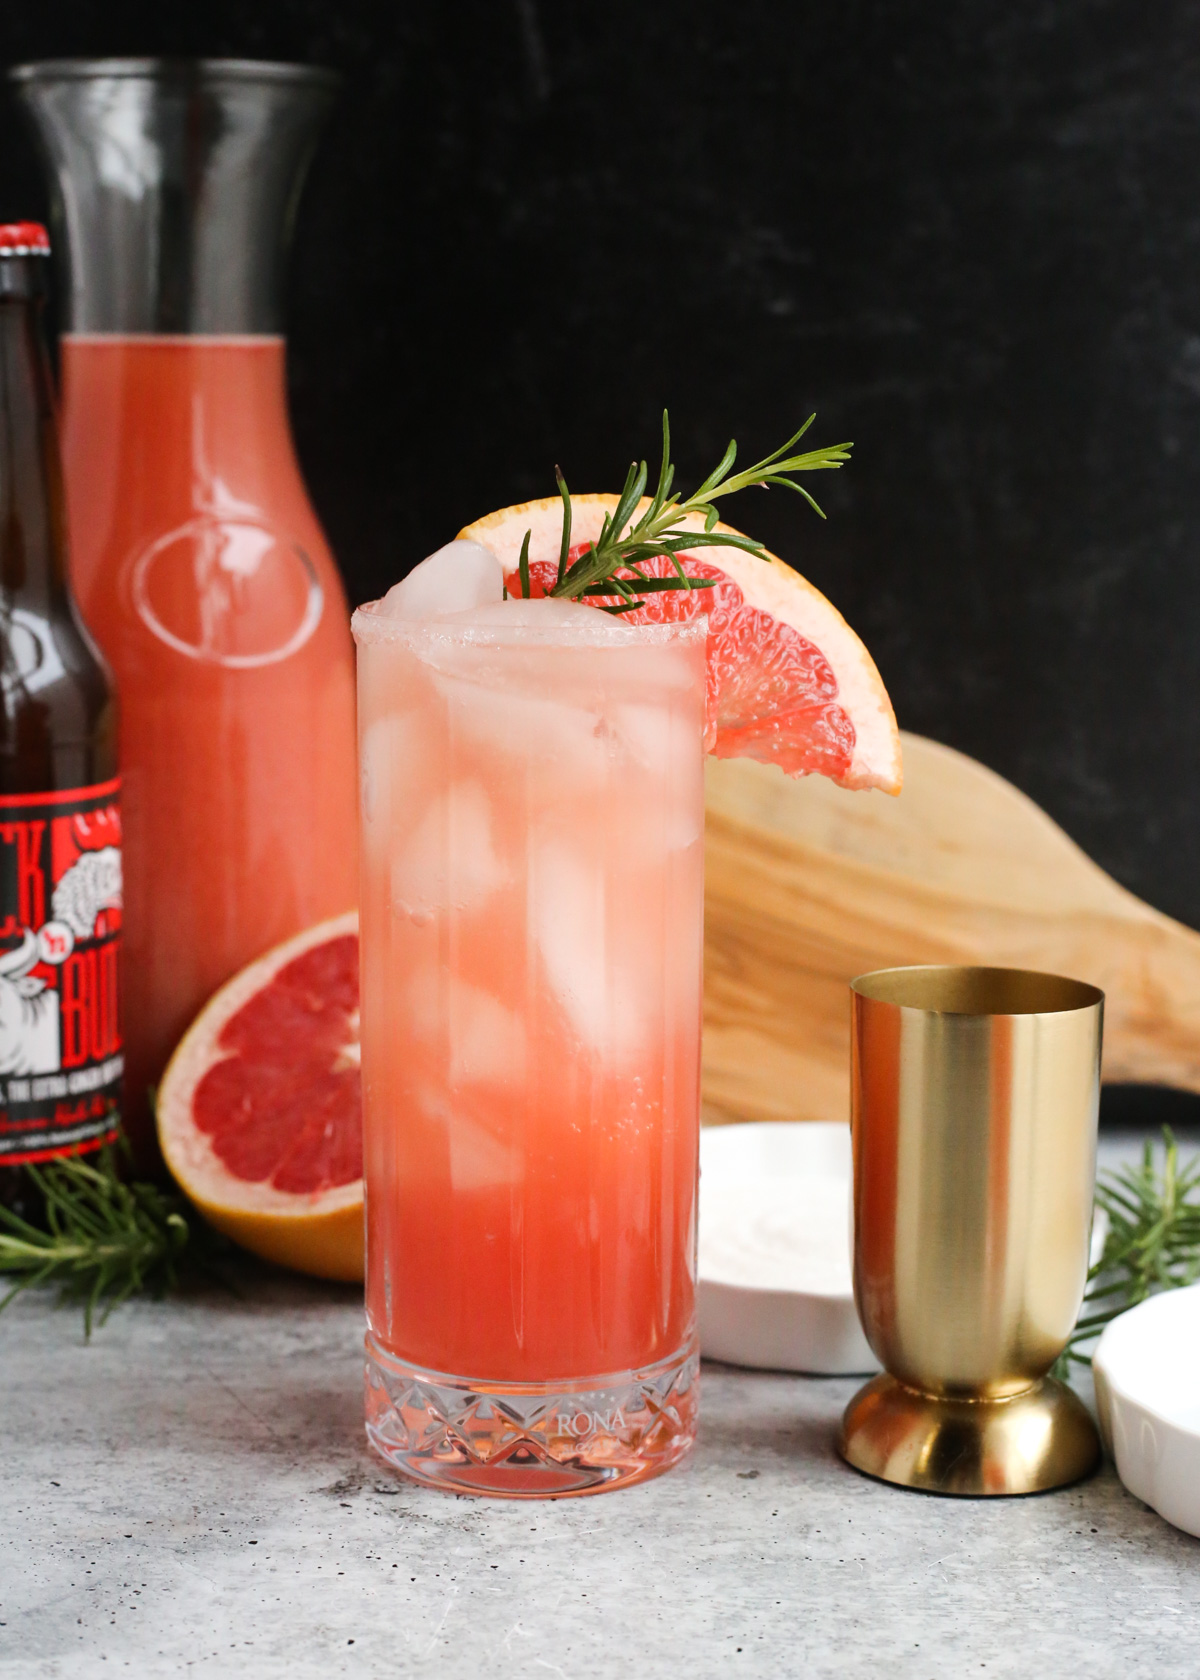 A ginger beer paloma cocktail is served in a highball glass and garnished with a sprig of rosemary and slice of grapefruit, with a bottle of ginger beer and carafe of fresh grapefruit juice in the background